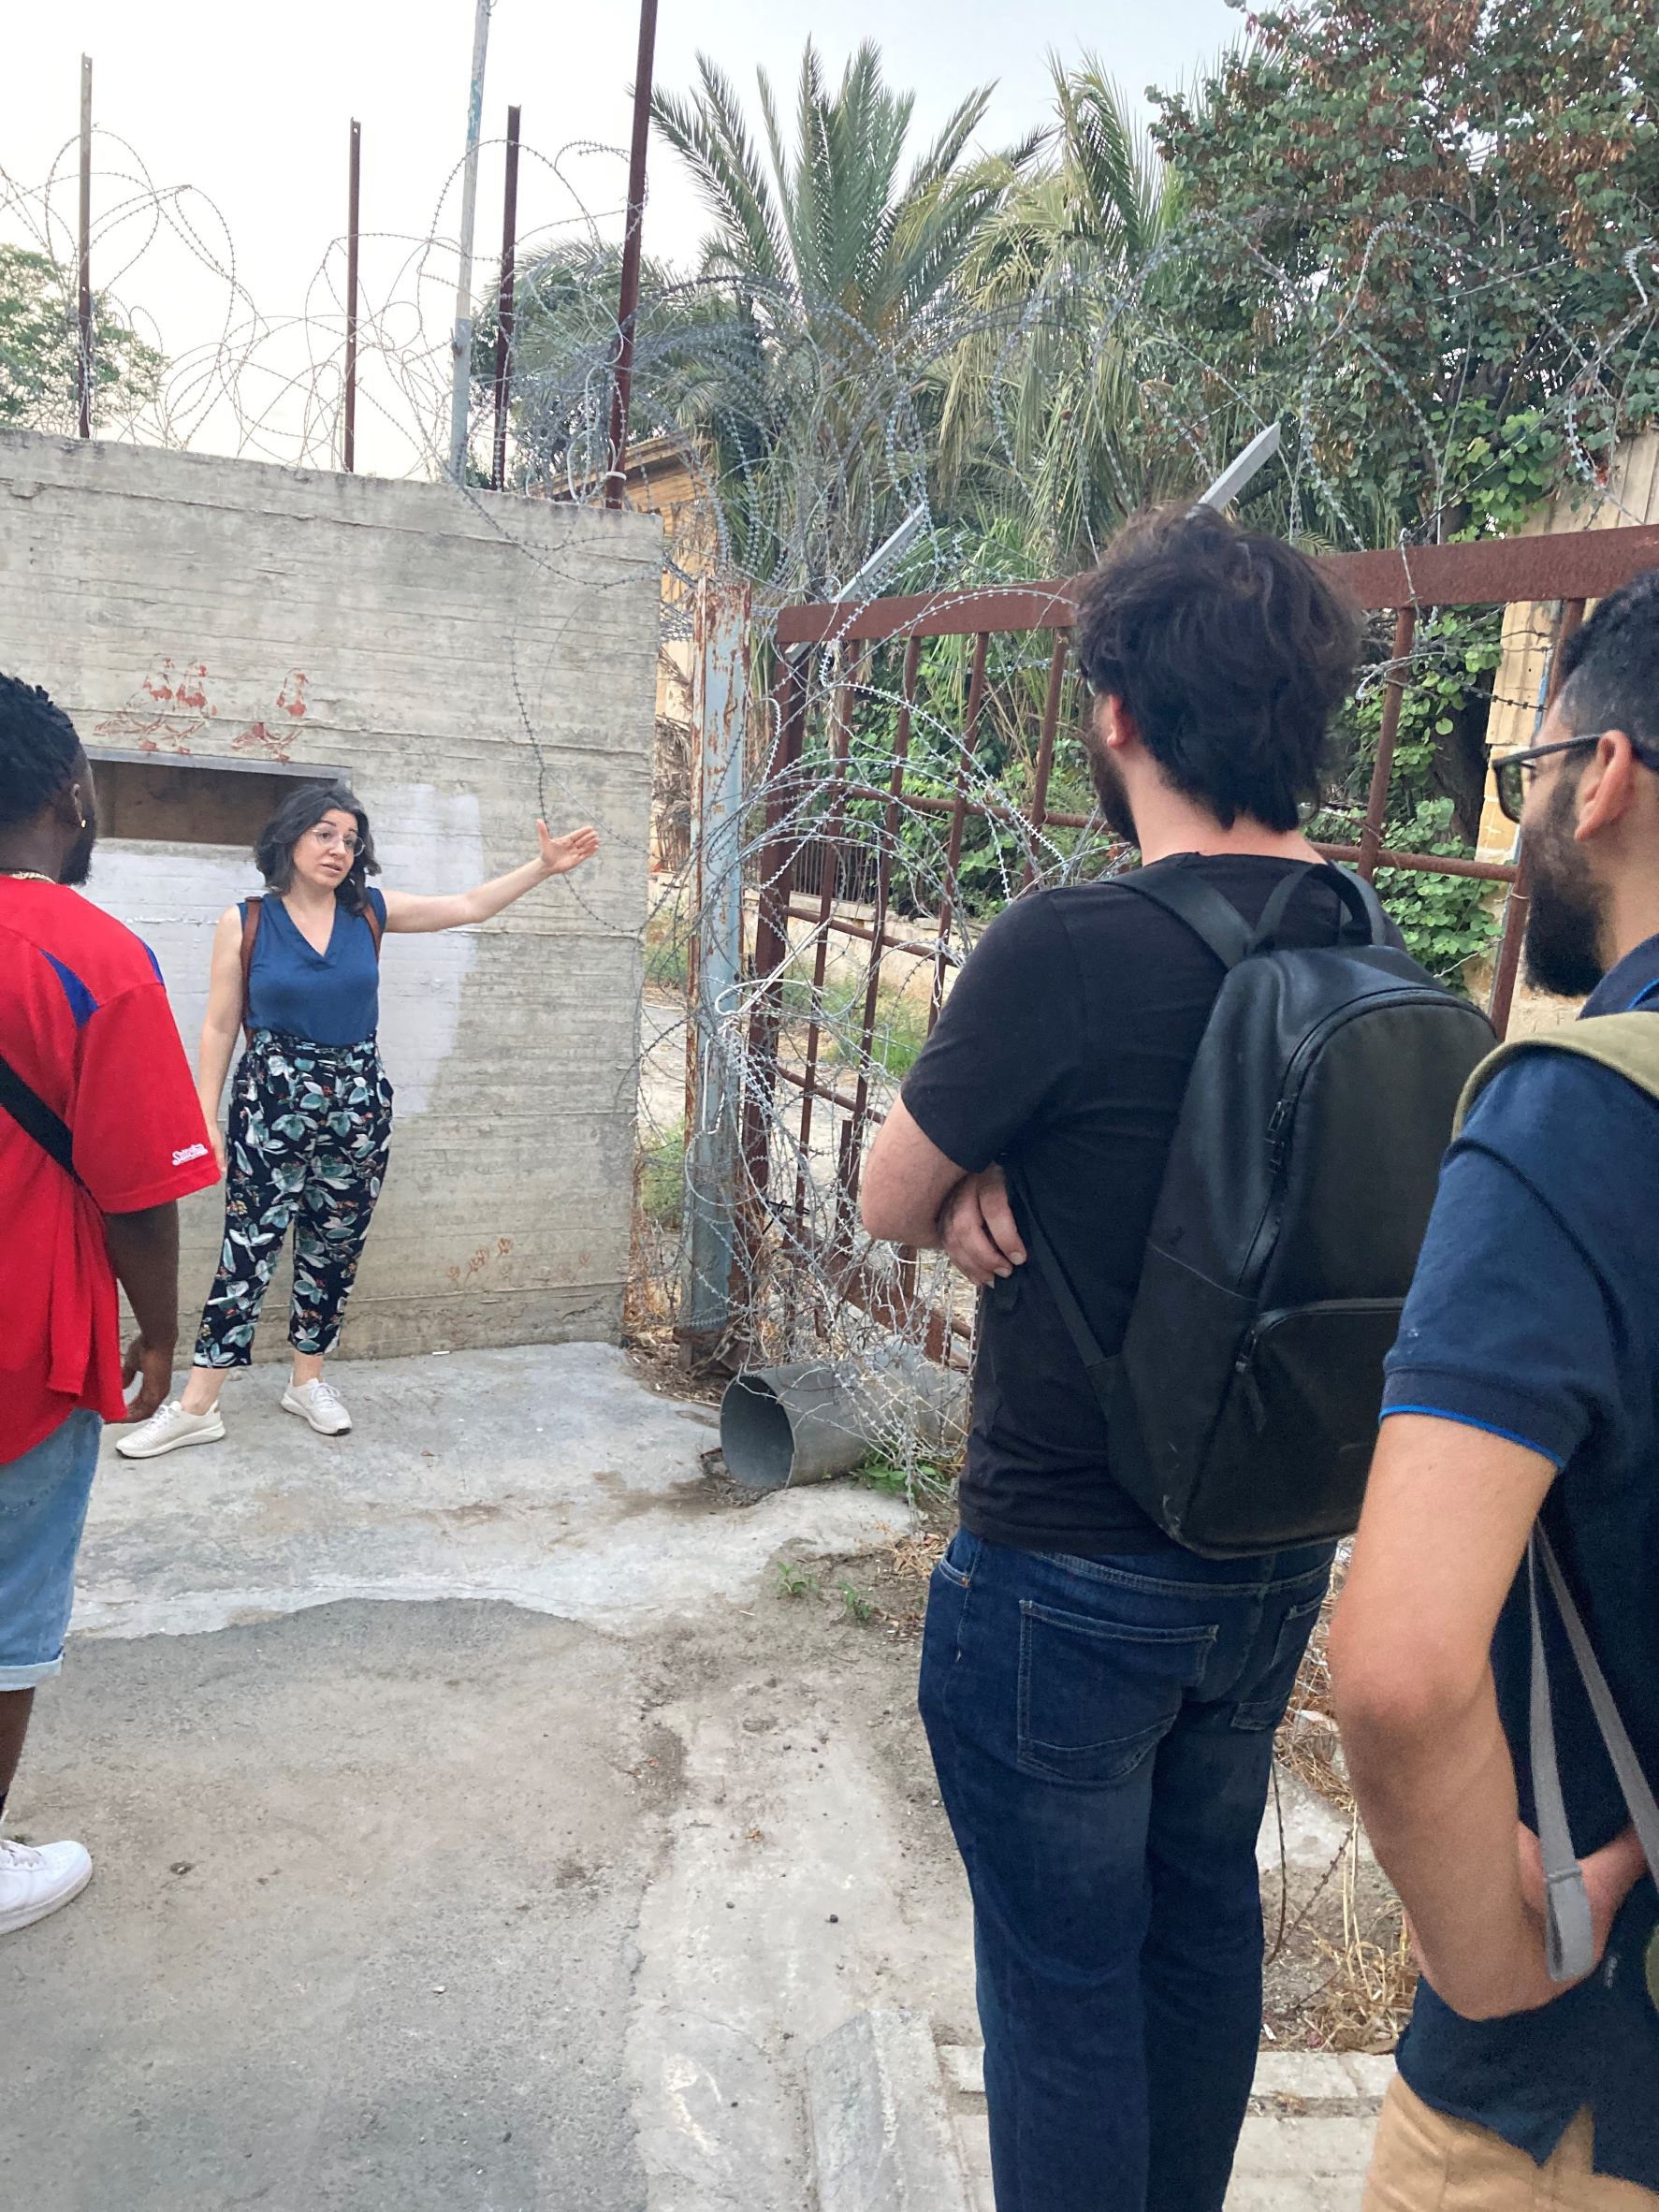 Dr. Nicoletta Demetriou, a 2017 visiting Fulbright Scholar at Stockton, shows the group around the old city in Nicosia.